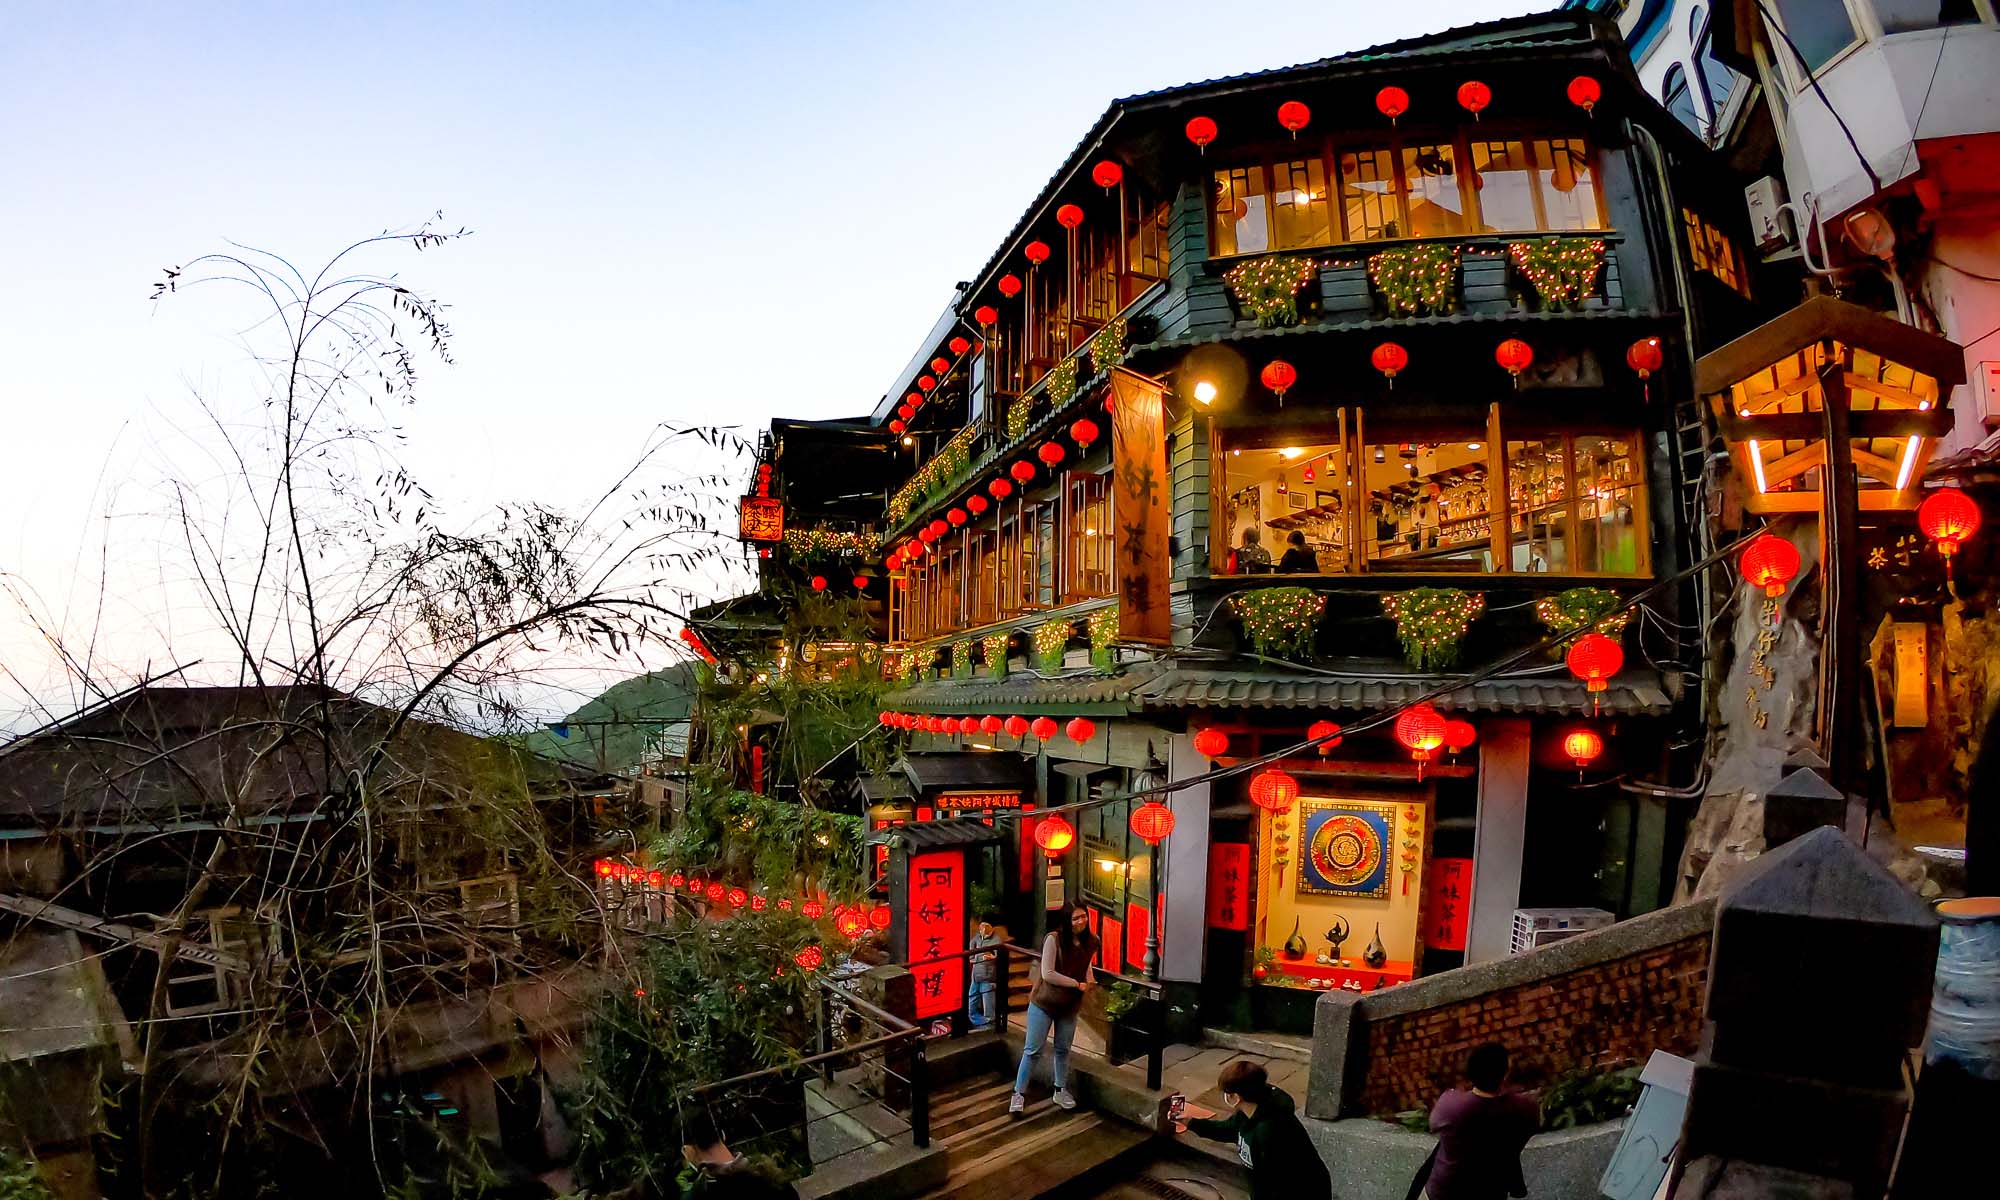 A view of A-Mei Tea House's colorful exterior.